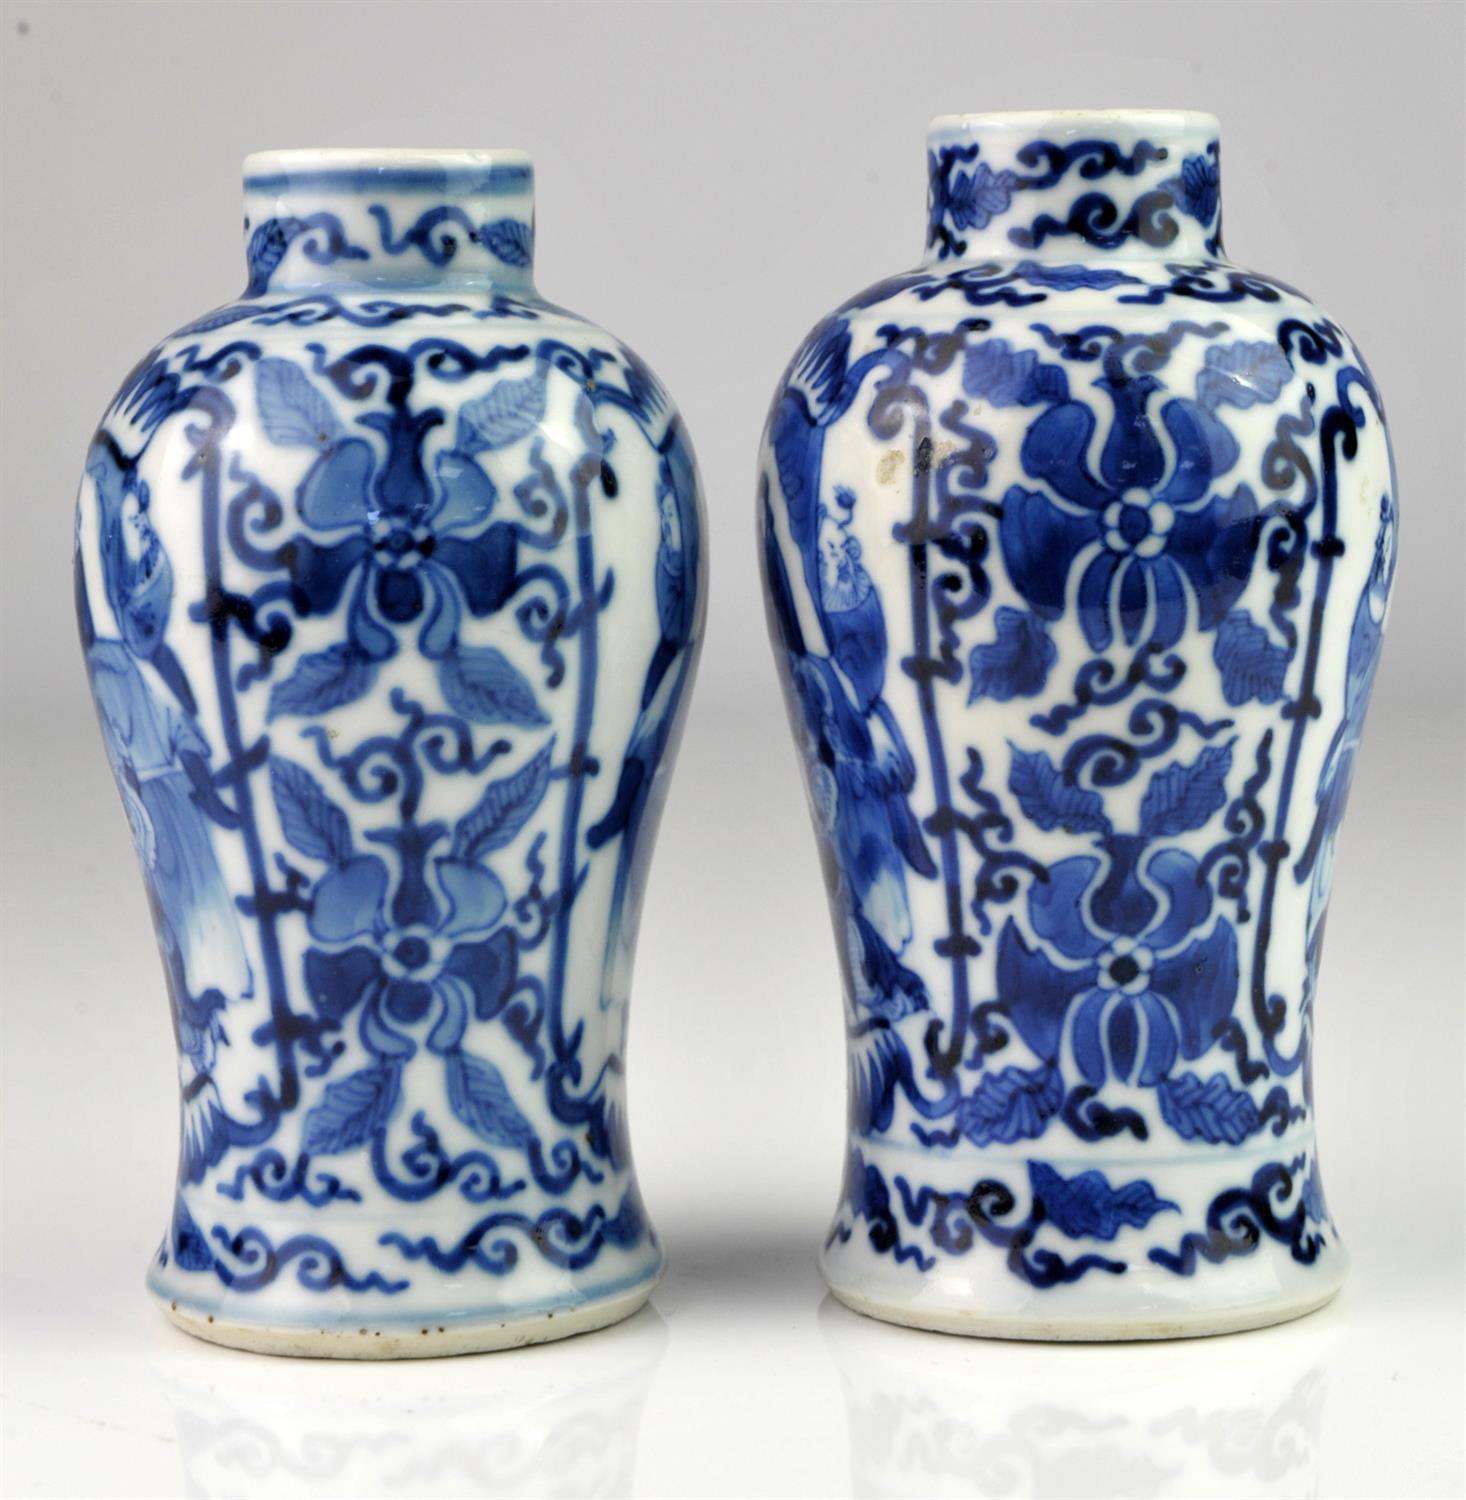 Matched pair of Chinese blue and white vases decorated with two panels of figures framed by - Image 4 of 5